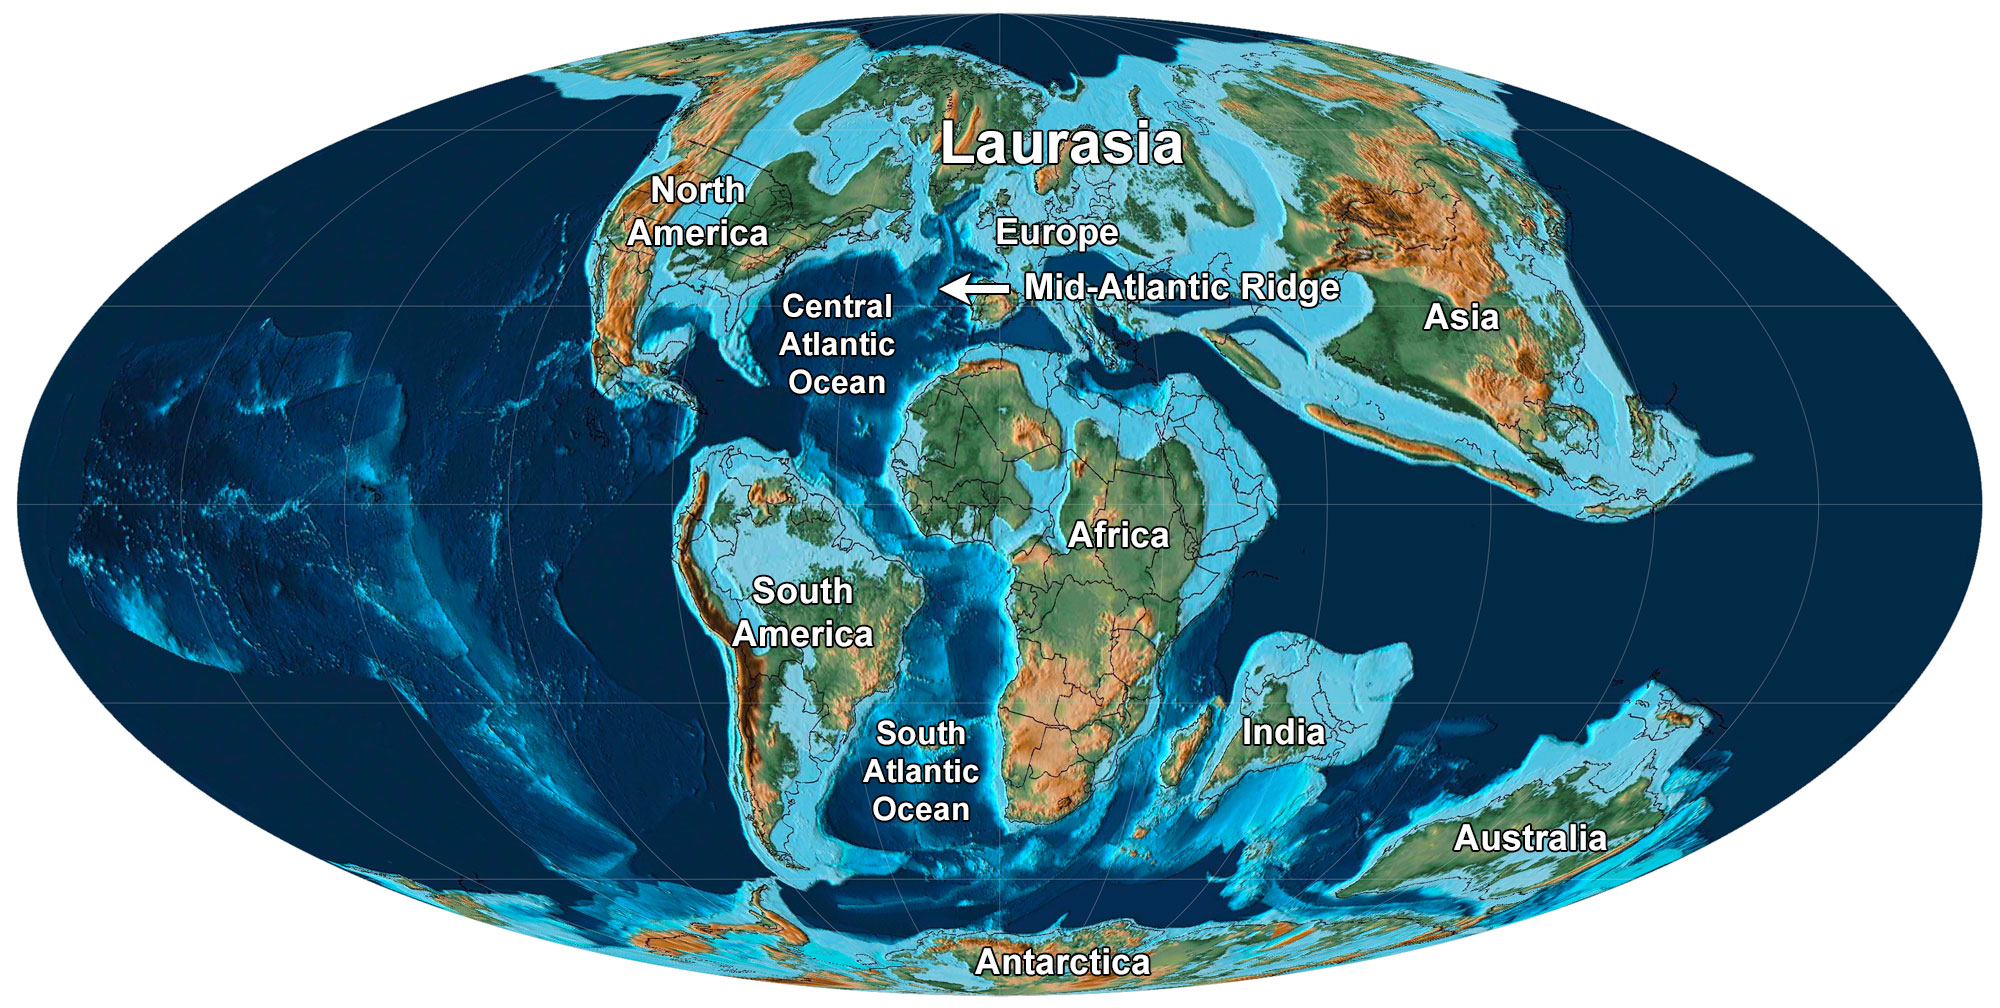 Reconstruction of the Earth in the Late Cretaceous about 80 million years ago when sea levels were high.